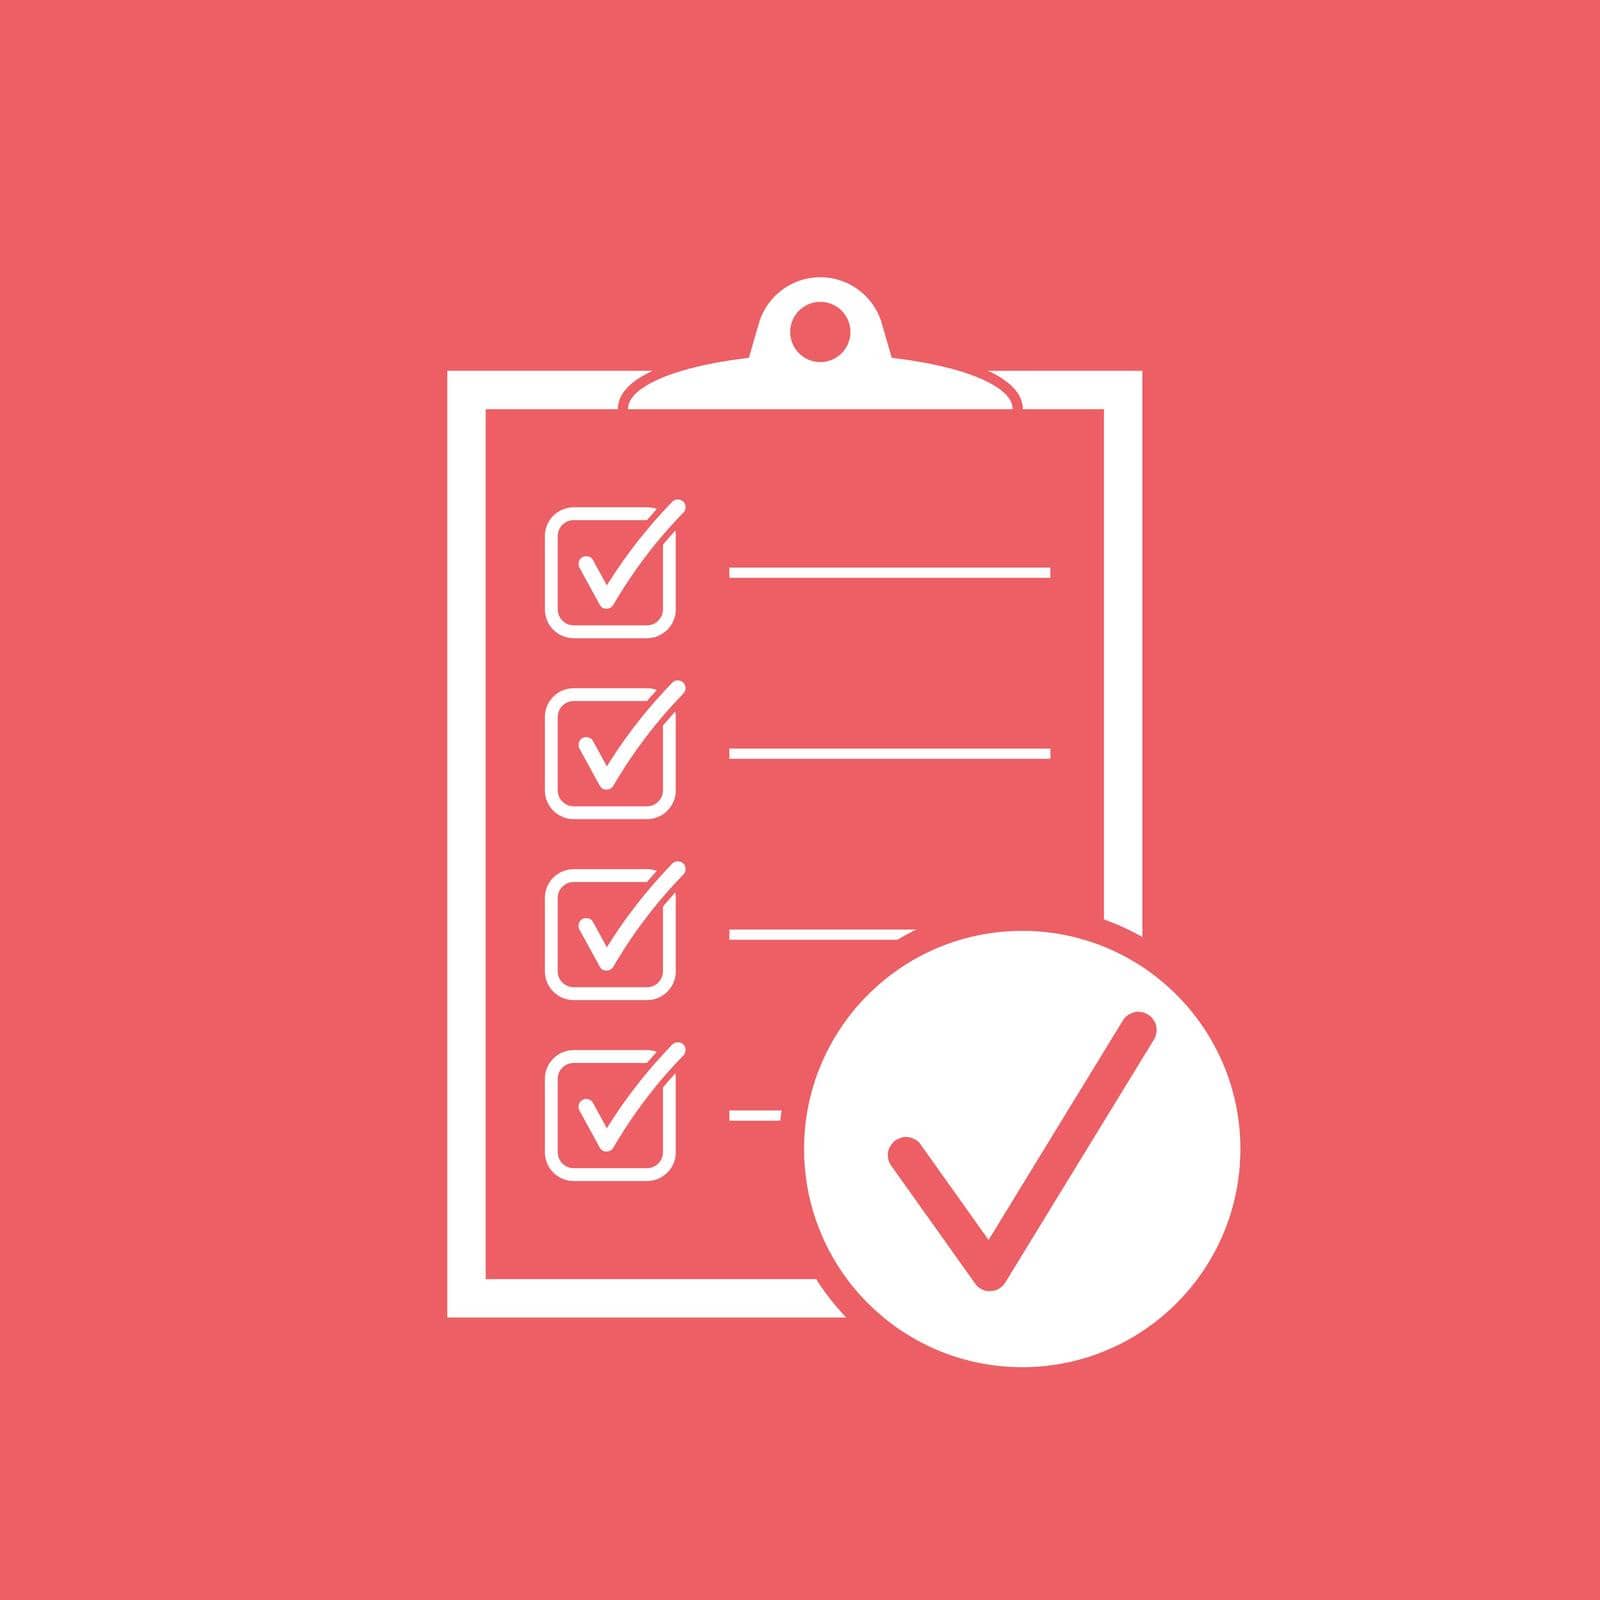 Checklist vector icon. Survey vector illustration in flat design on red background. by LysenkoA